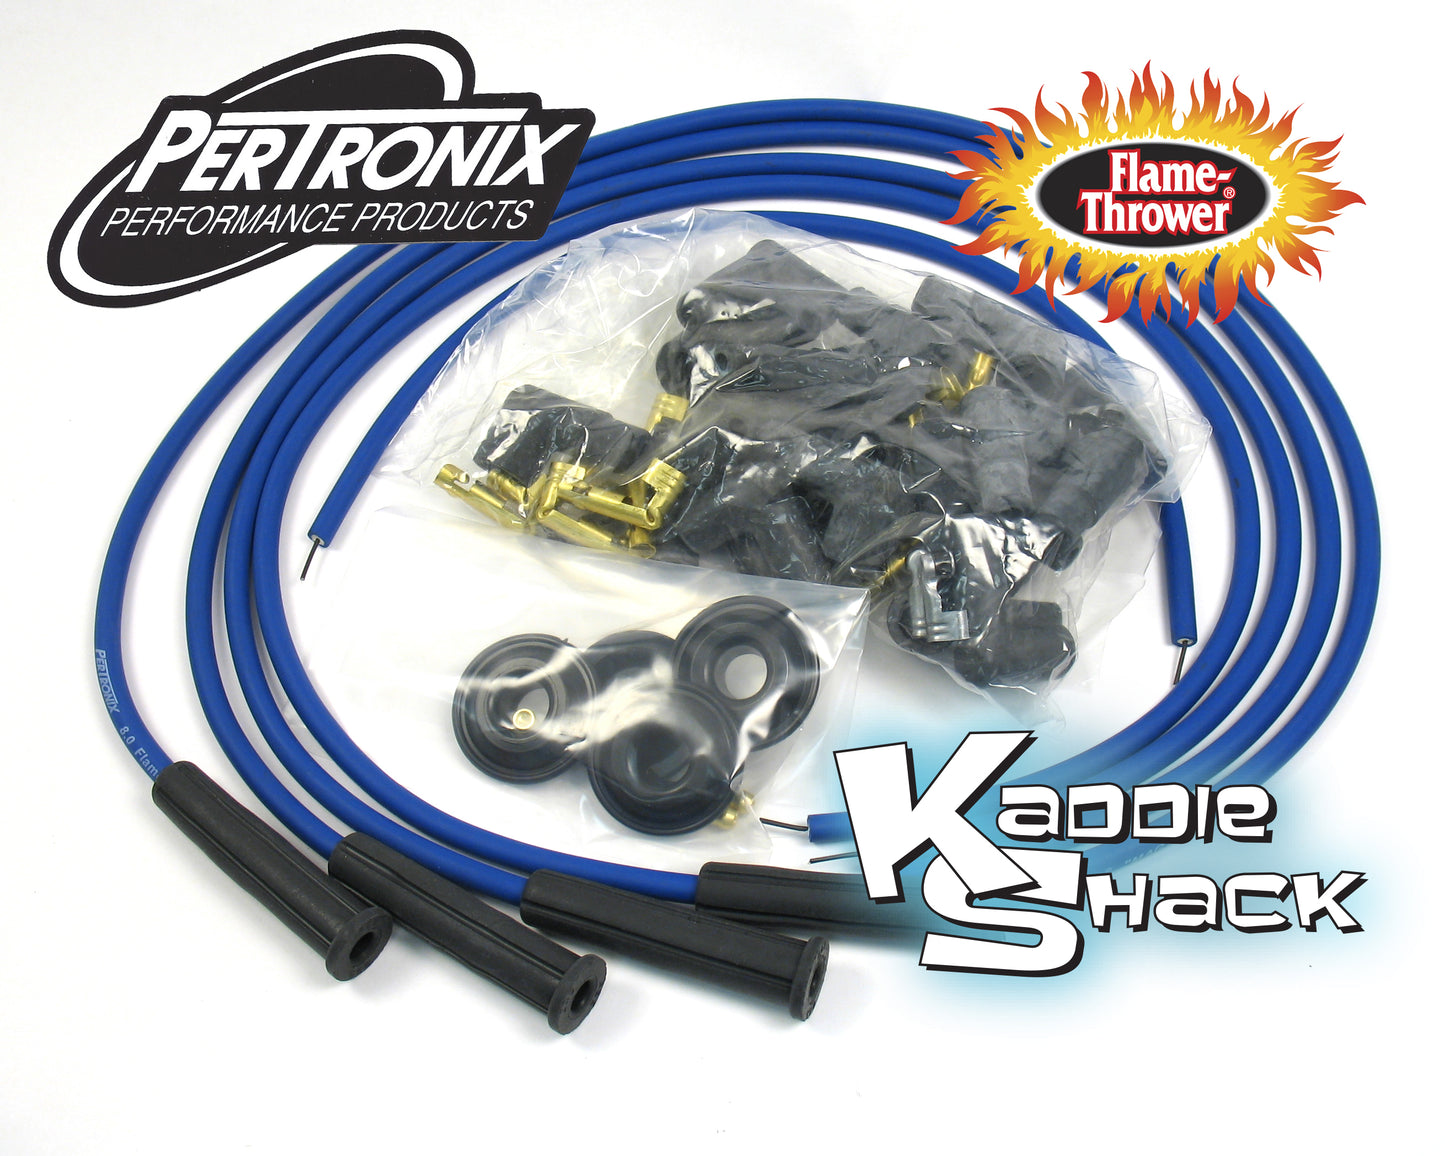 Pertronix Flame-Thrower 8mm Cut-To-Length Spark Plug Wires Blue